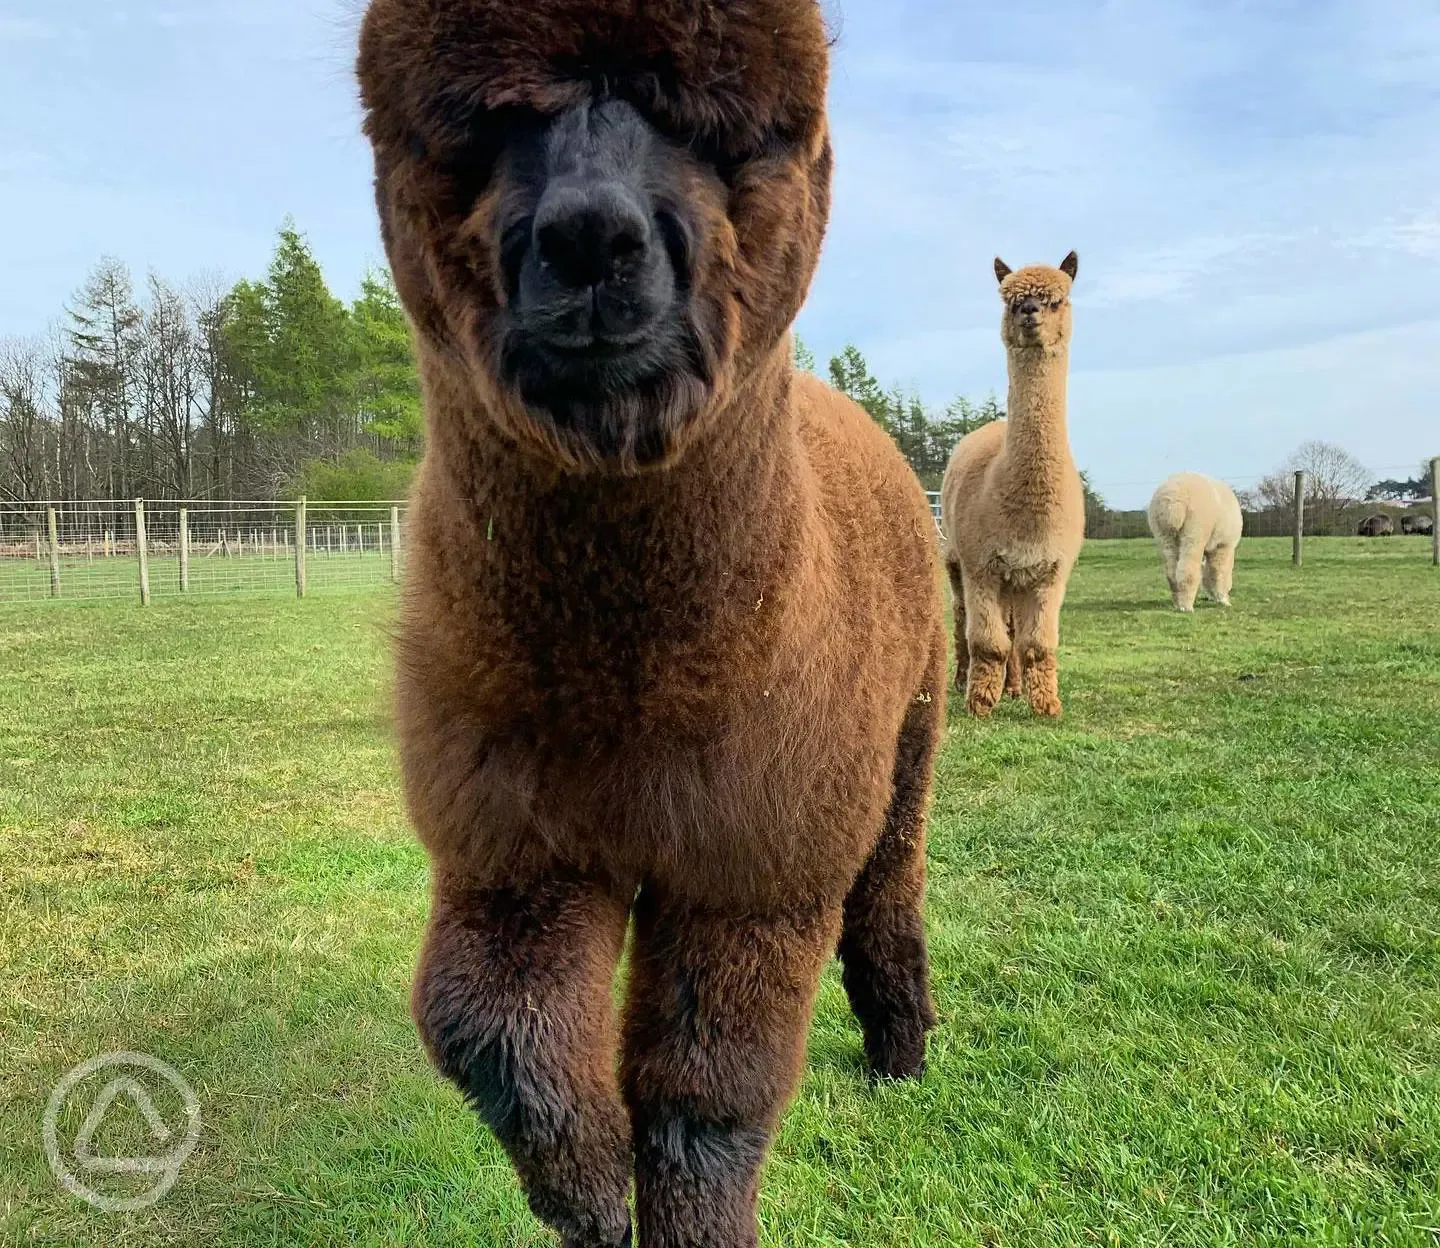 Meet the alpacas during your stay